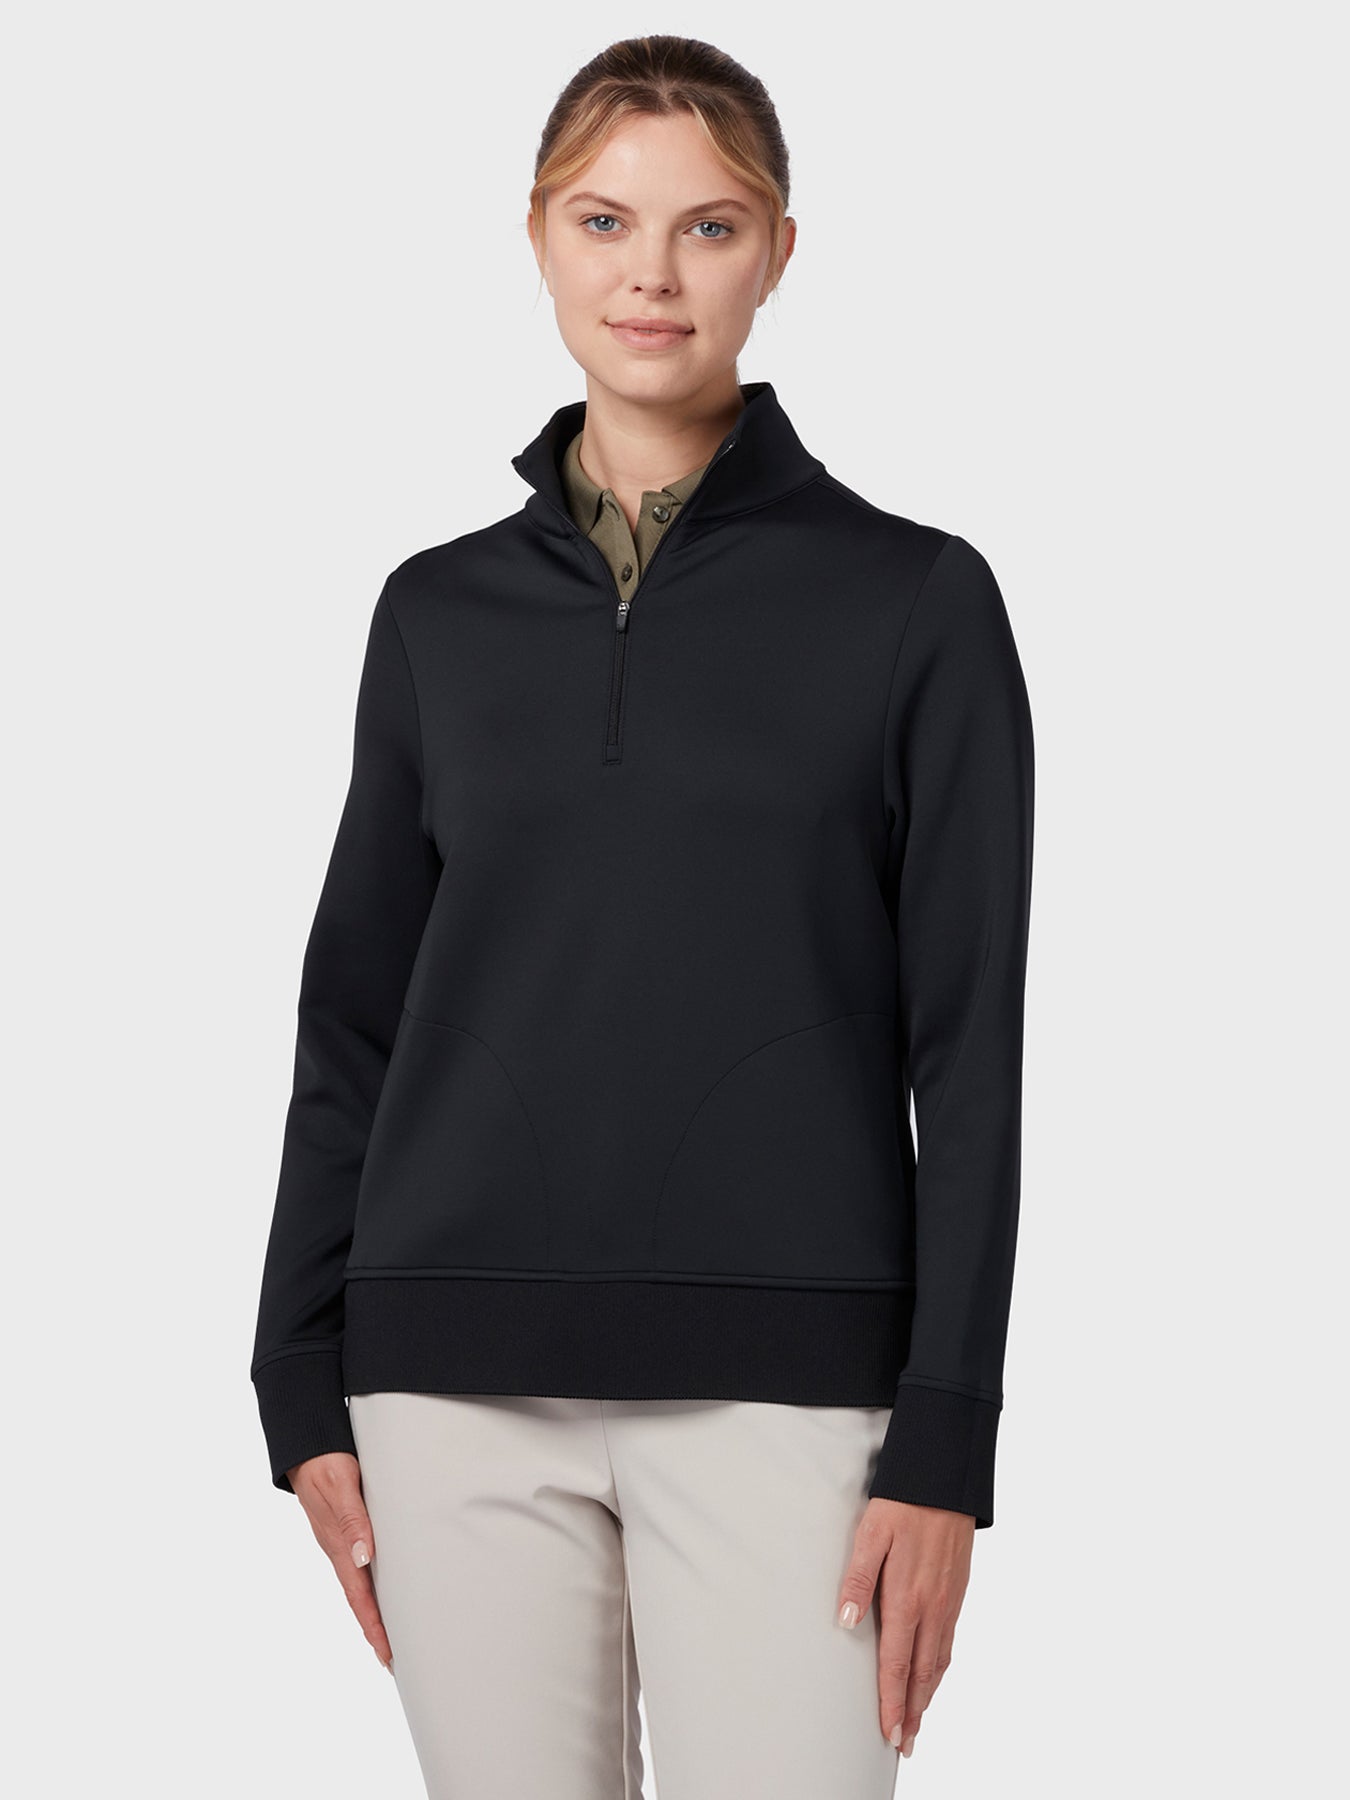 View Midweight Womens Fleece Crossover In Caviar information